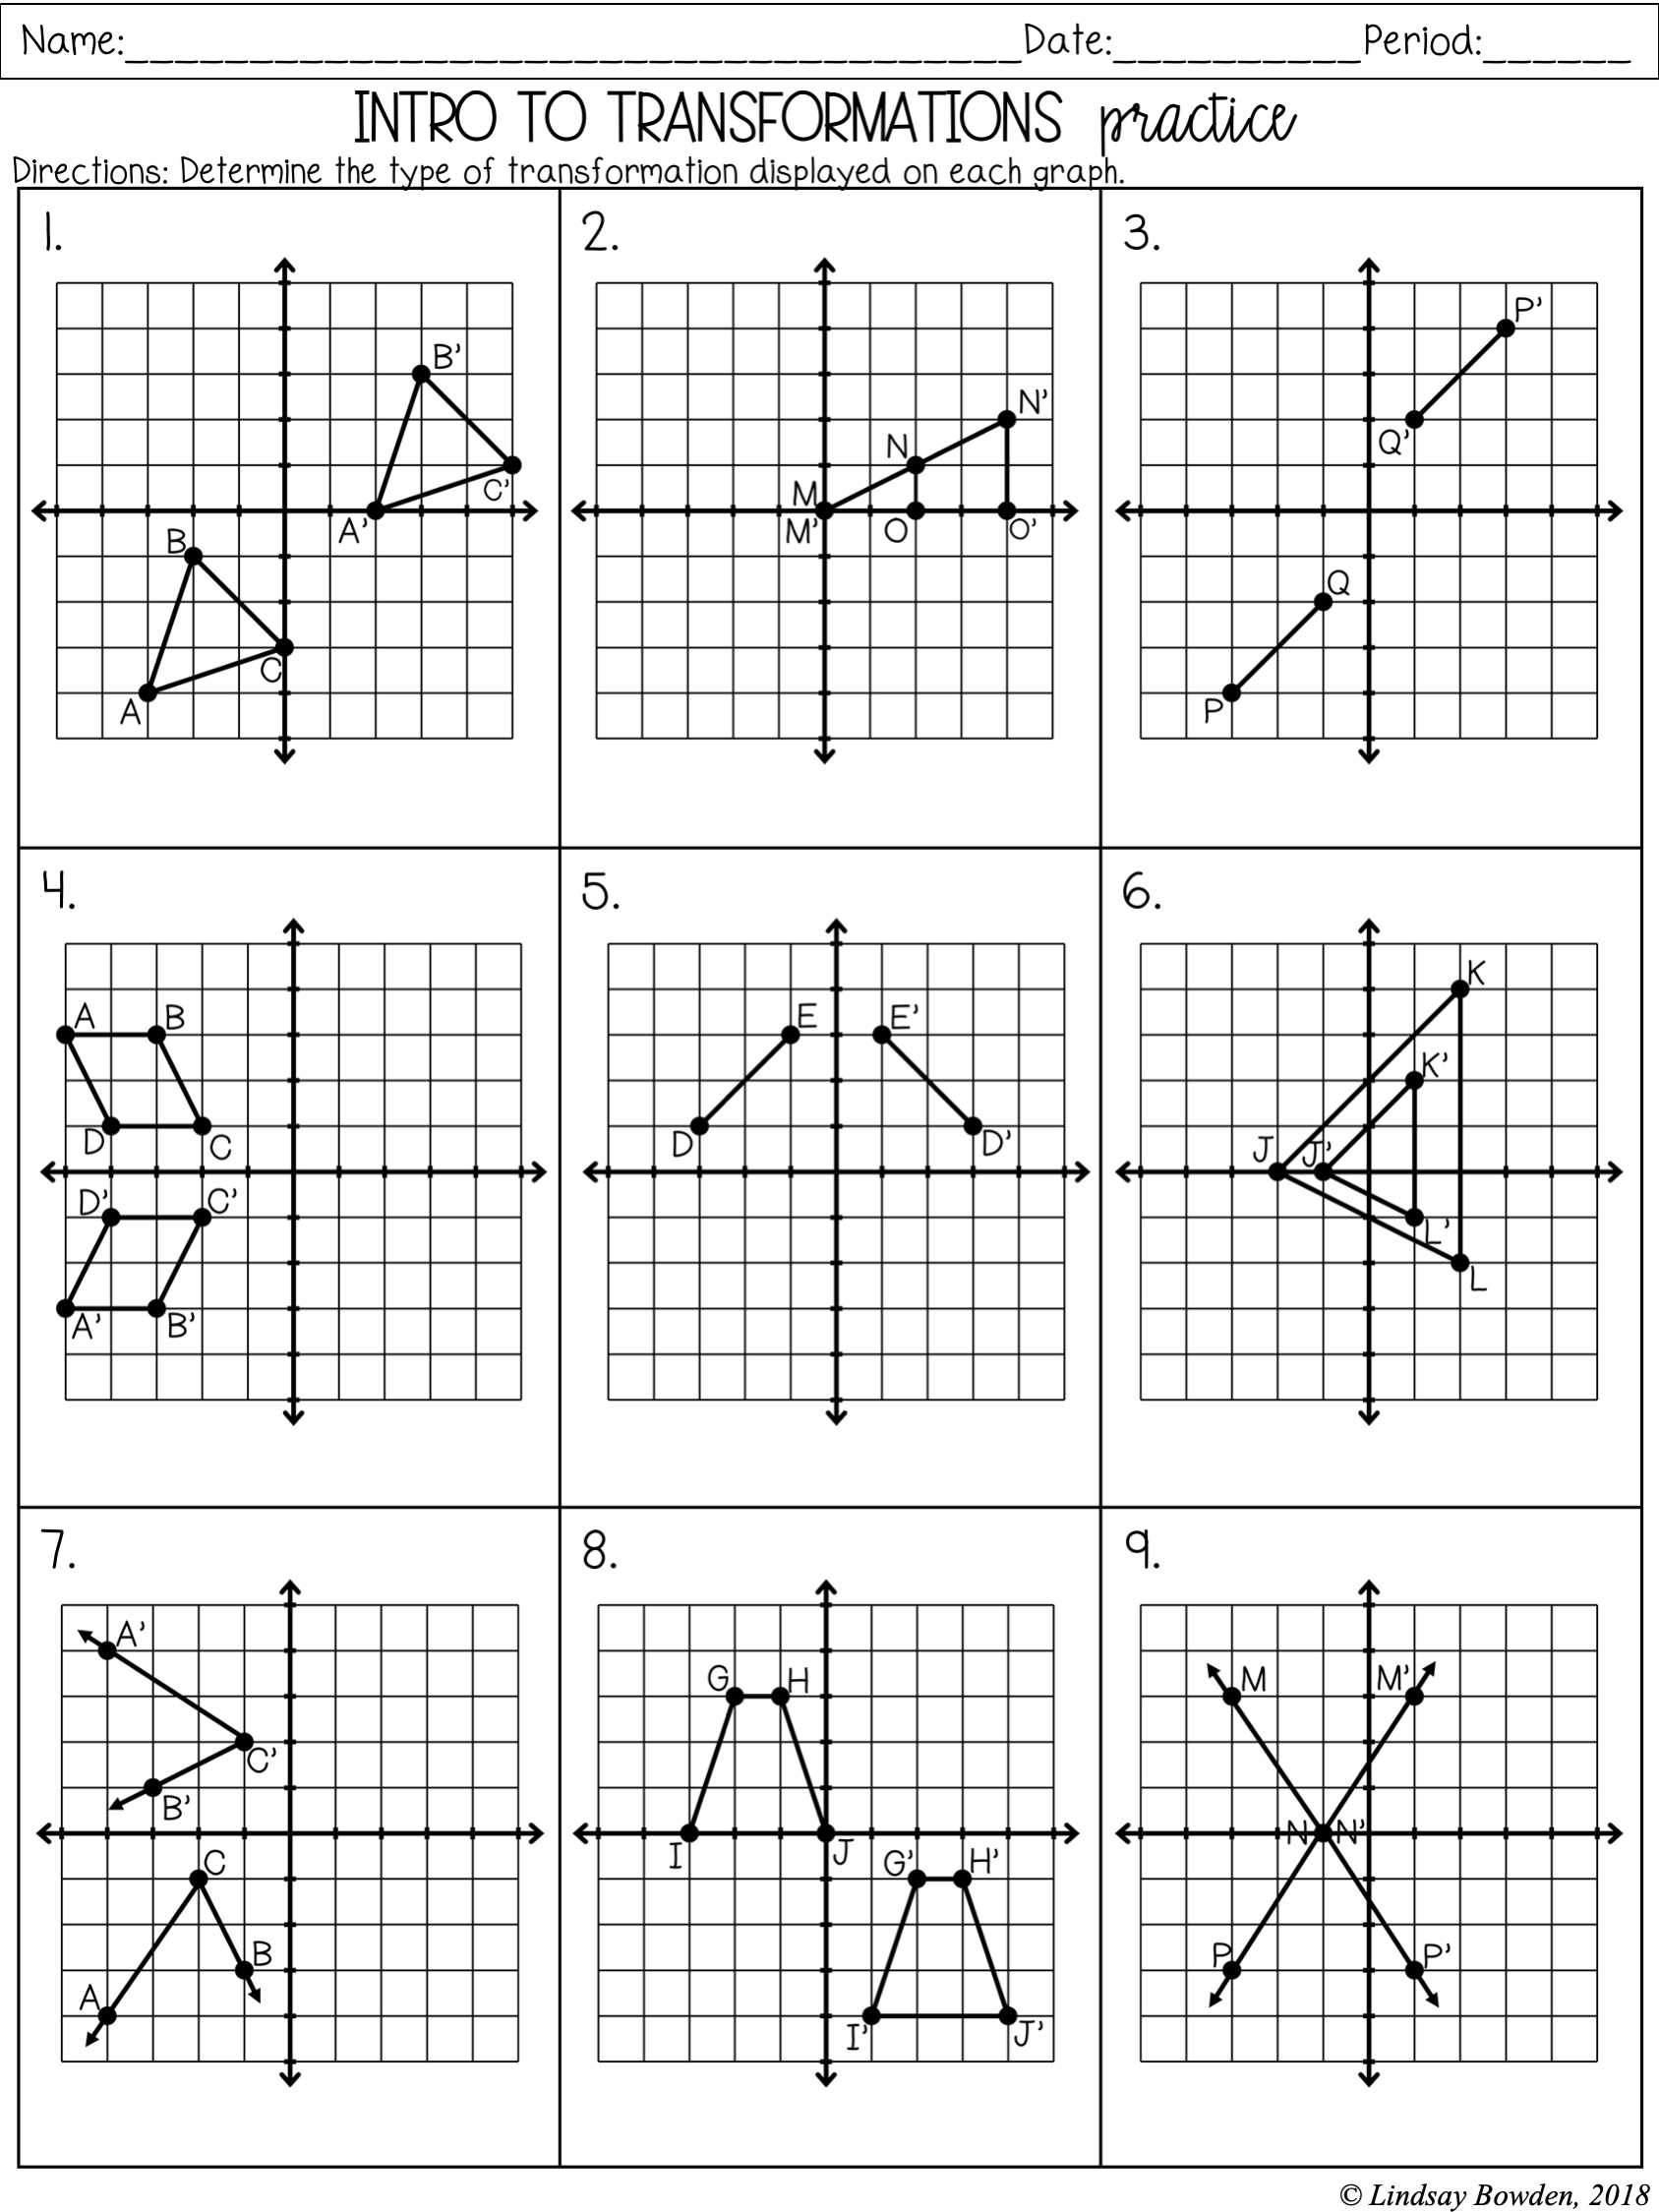 Transformations Notes and Worksheets - Lindsay Bowden Throughout Geometry Transformations Worksheet Answers